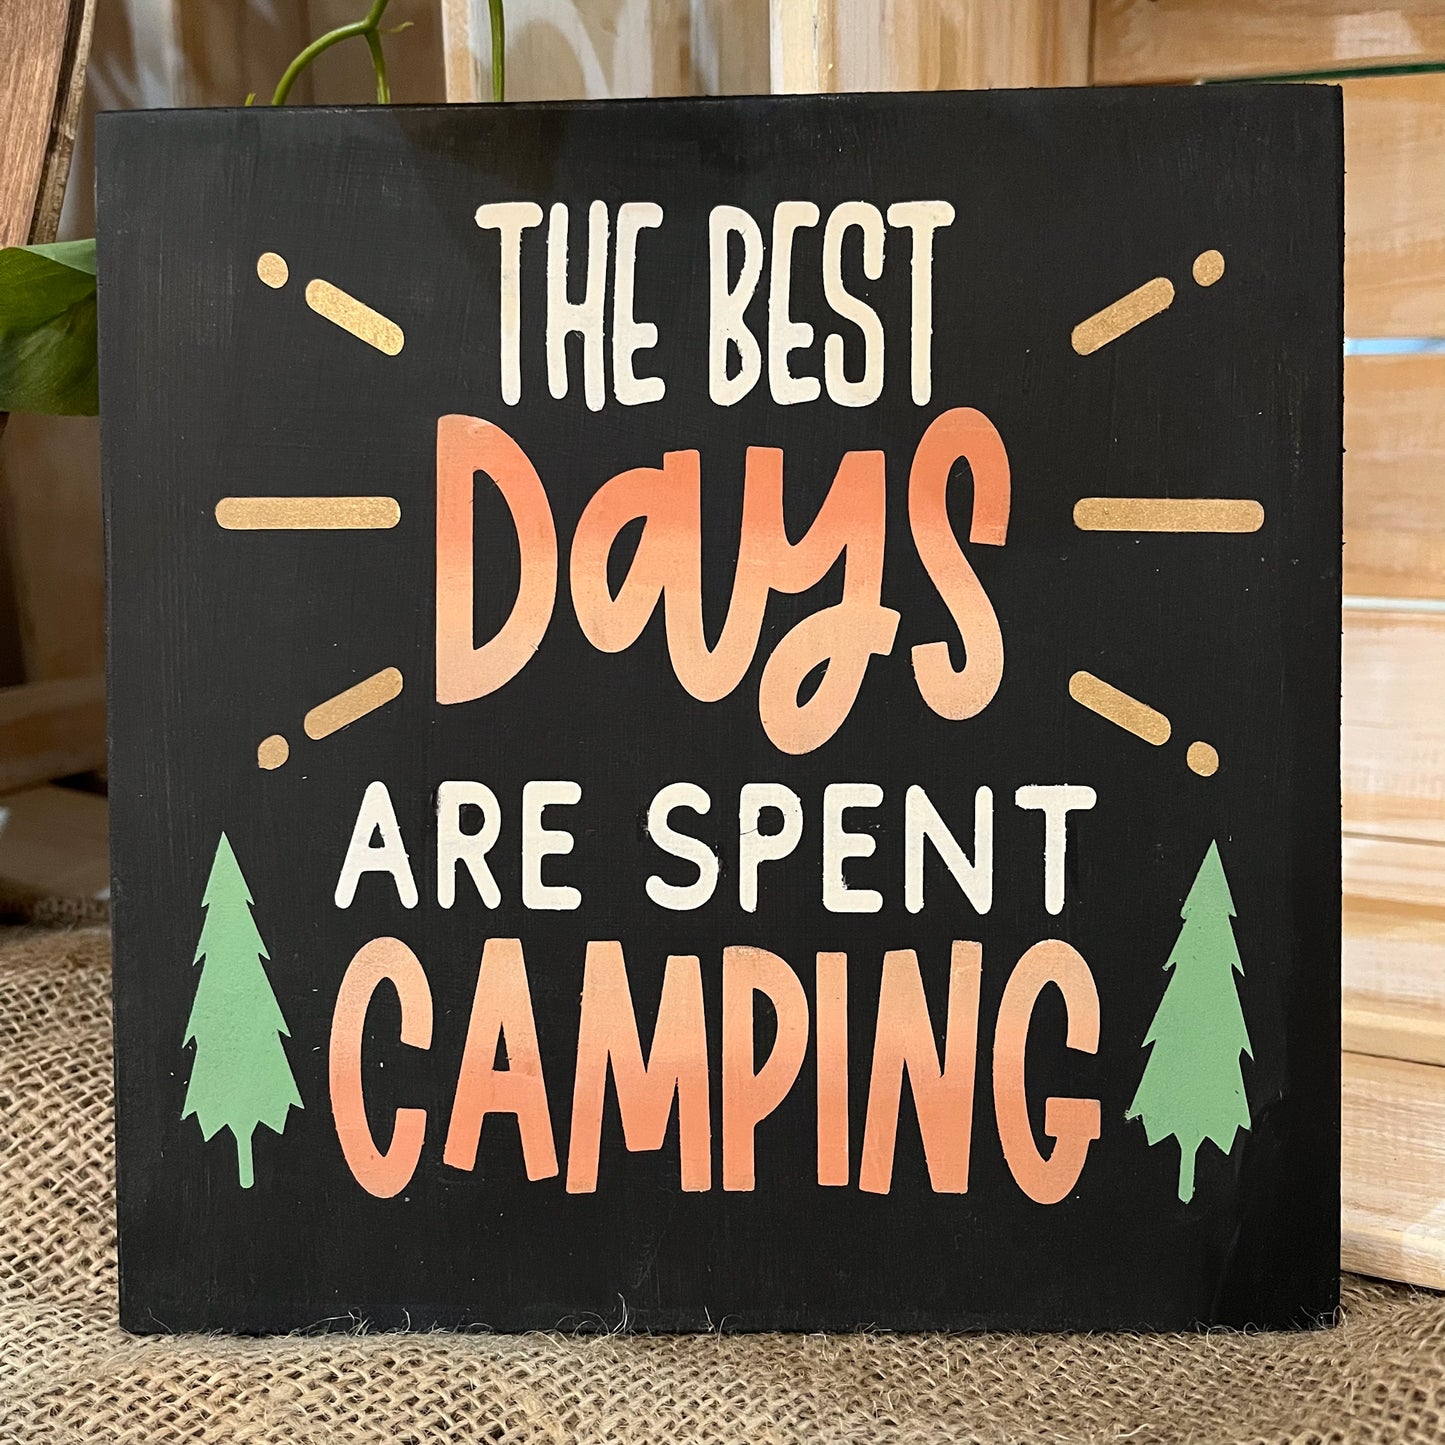 The Best Days are Spent Camping: MINI DESIGN - Paisley Grace Makery